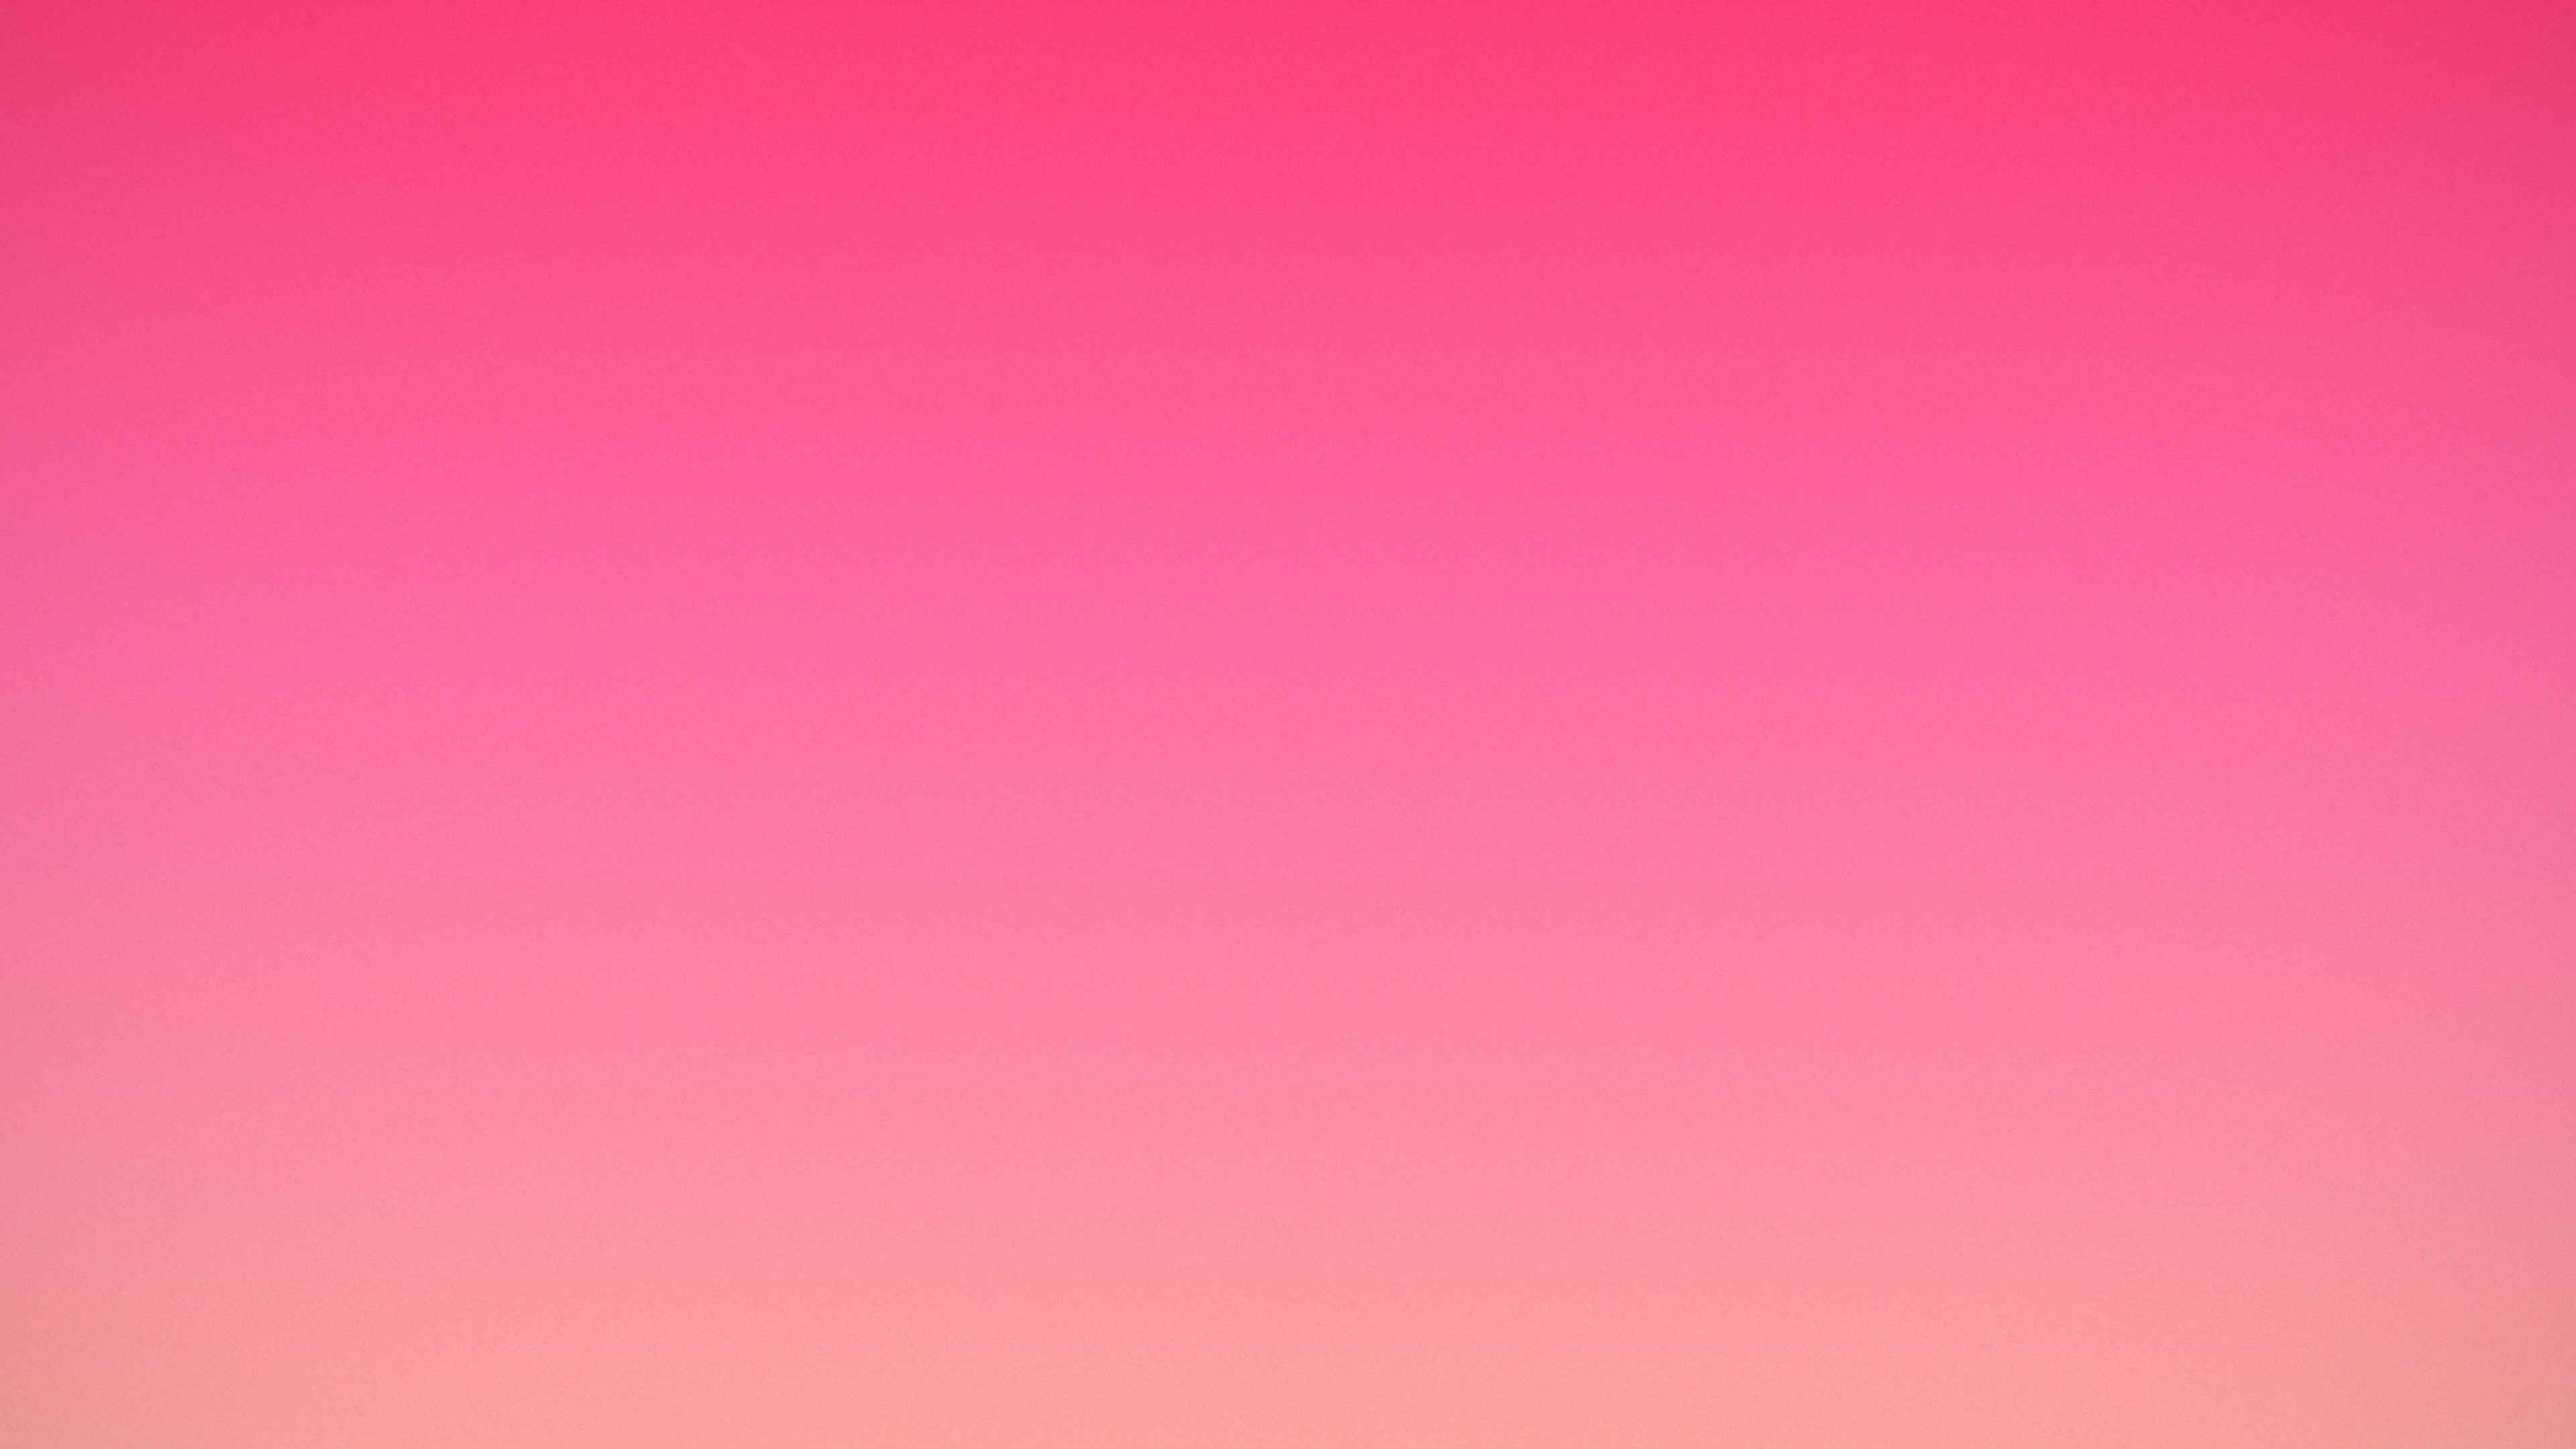 Free download 57 Plain Pink Wallpapers on WallpaperPlay [3840x2160] for